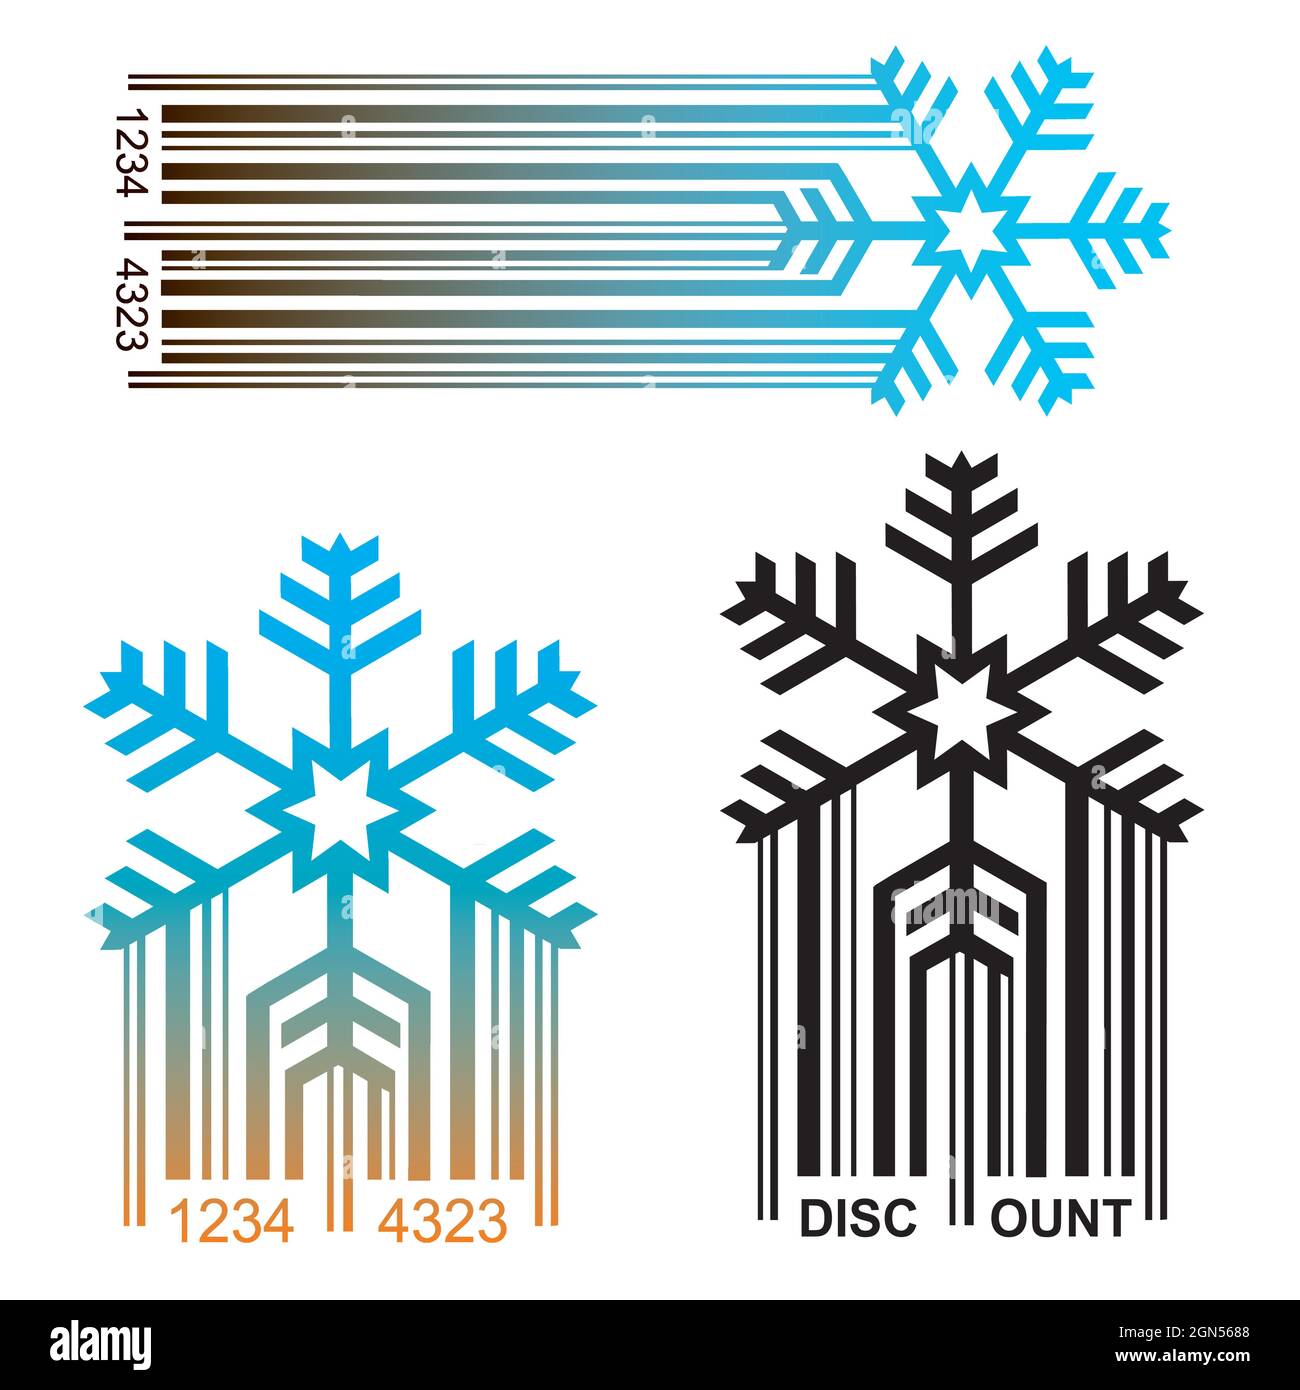 Snowflake,original BAR code, discount concept. Symbol of snowflake with ean code symbolizing price discounts. Vector available. Stock Vector